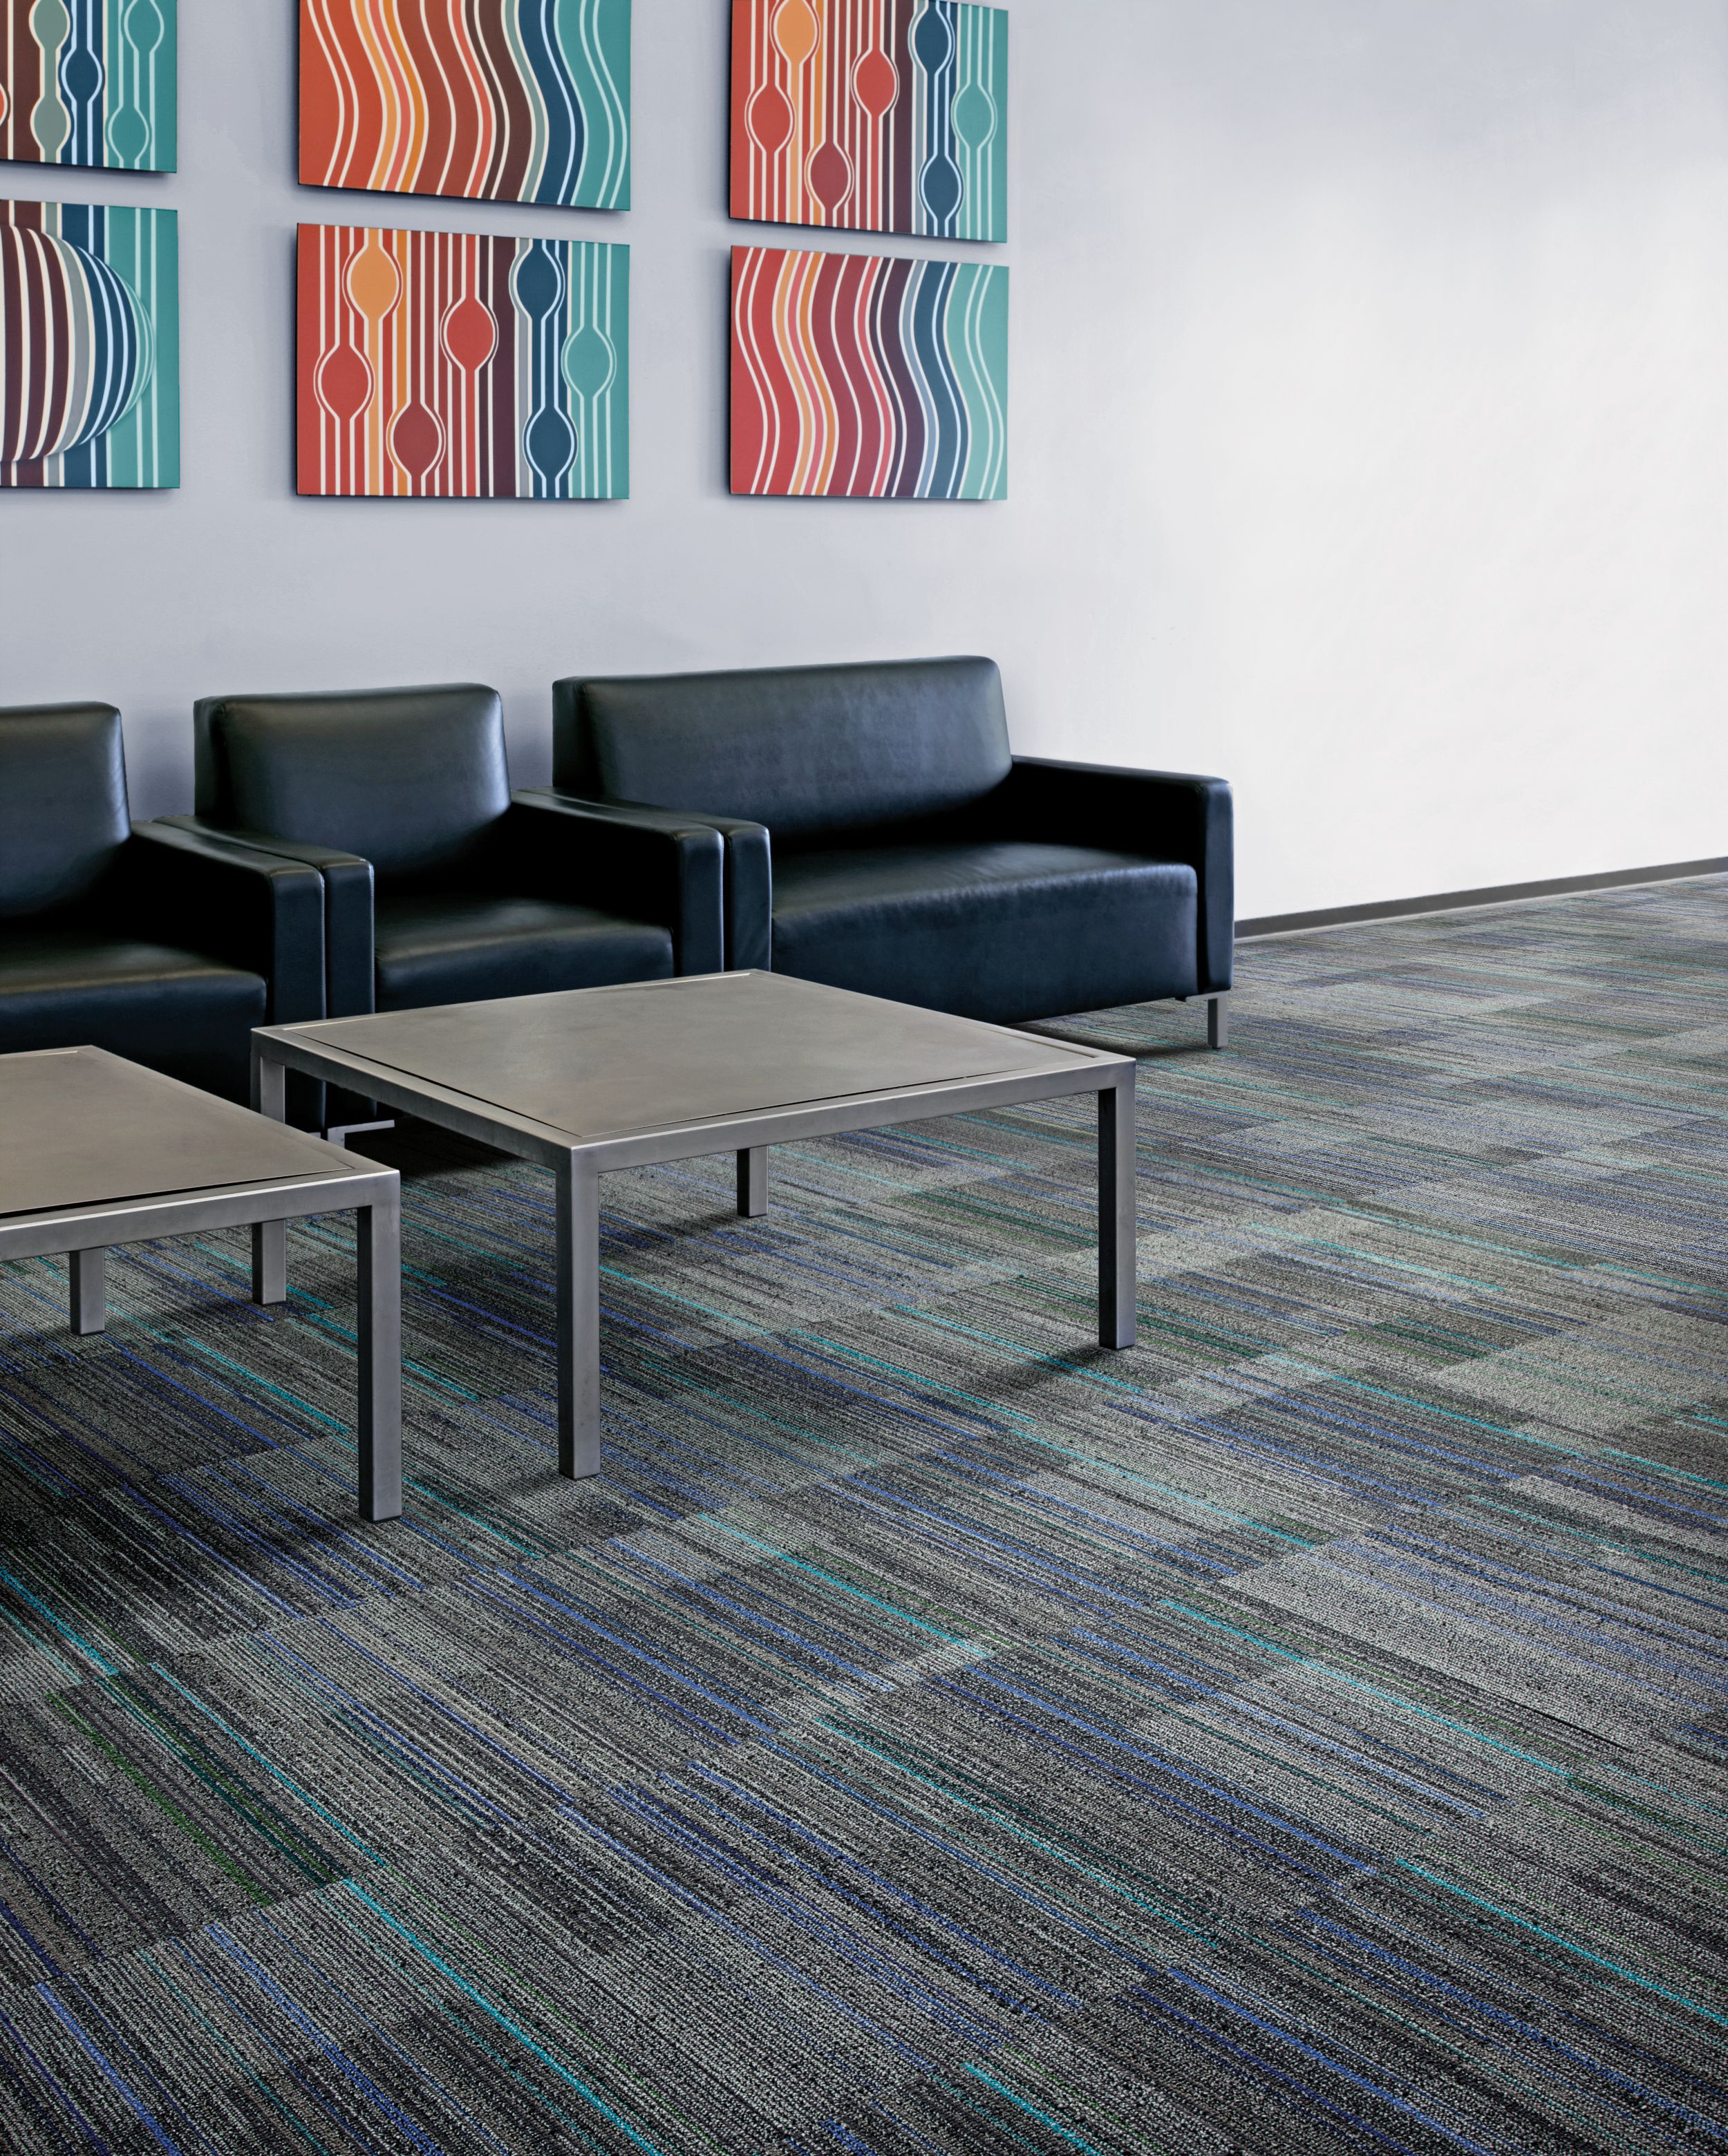 Interface Straight Edge carpet tile in waiting area with table and chairs imagen número 1